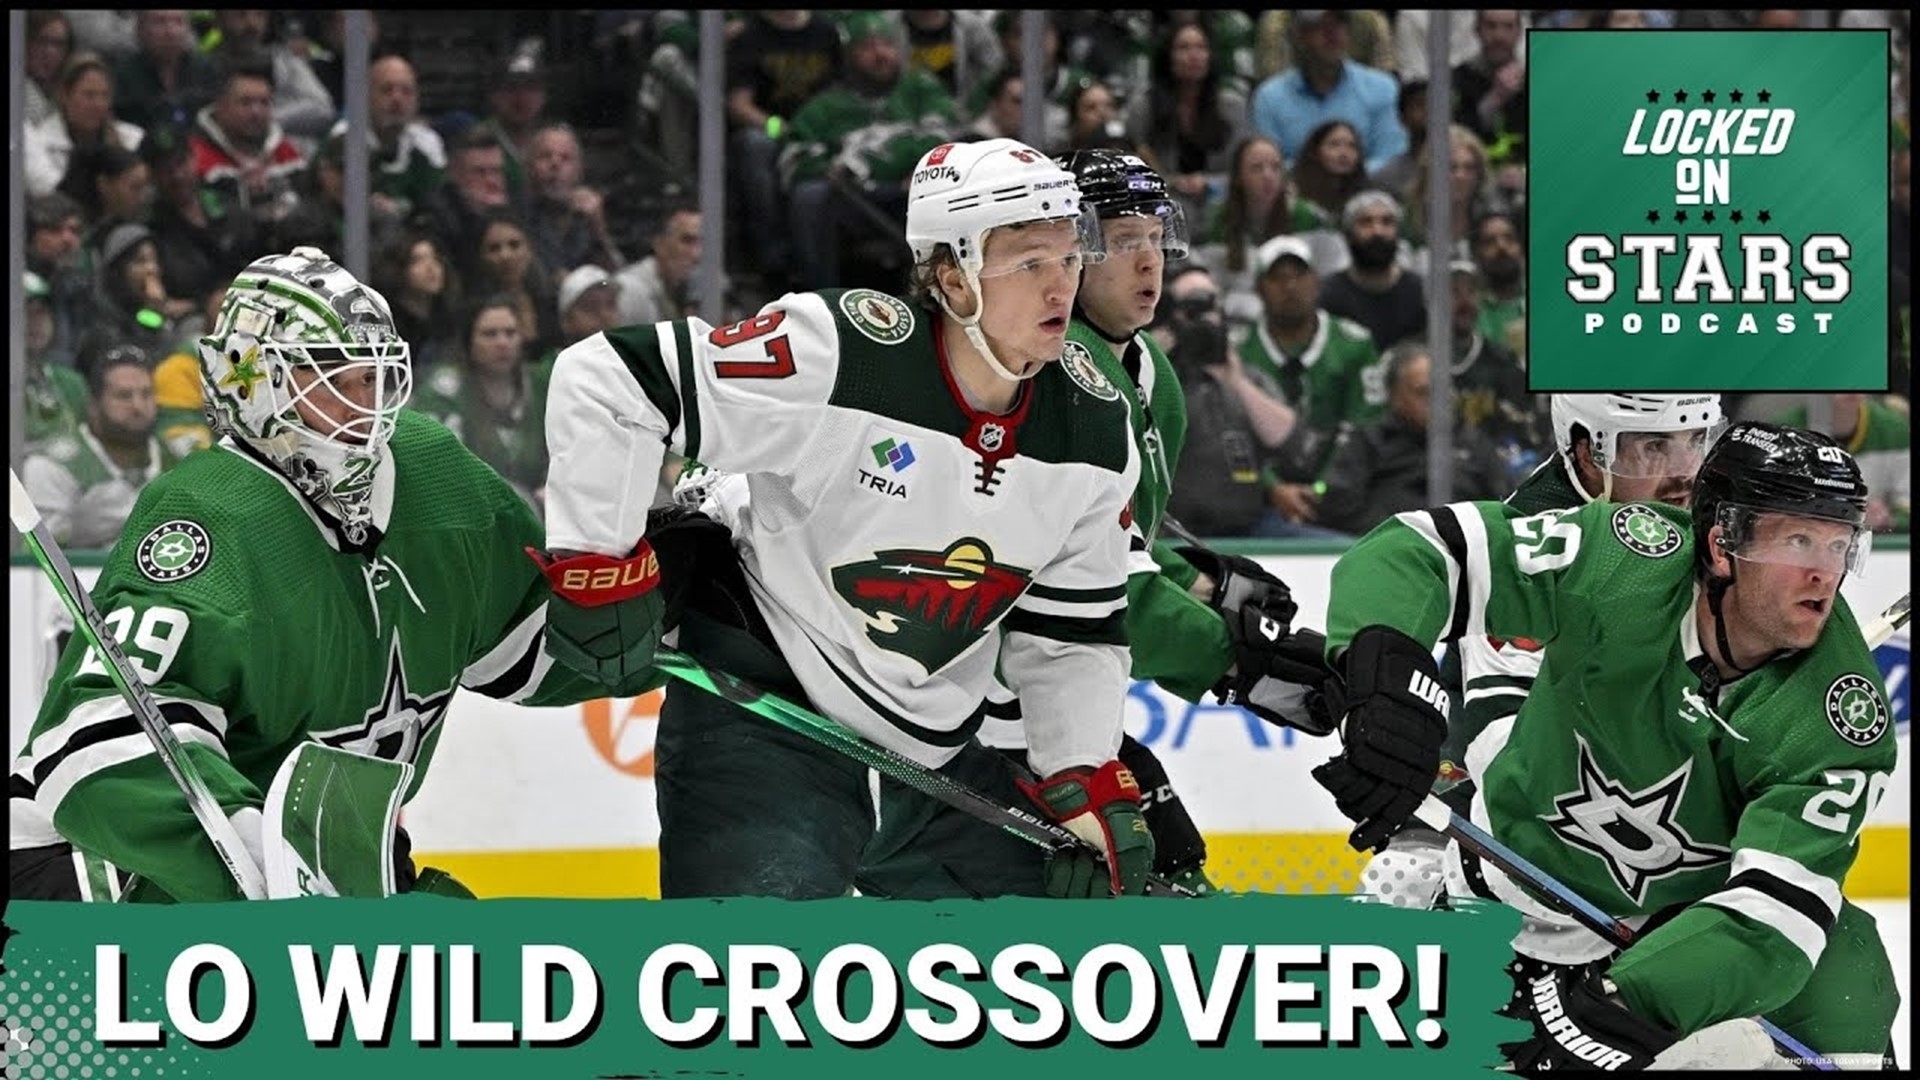 On today's special crossover edition on Locked On Stars, Joey and Seth Toupal of Locked On Wild give their takes on the Dallas Stars and Minnesota Wild